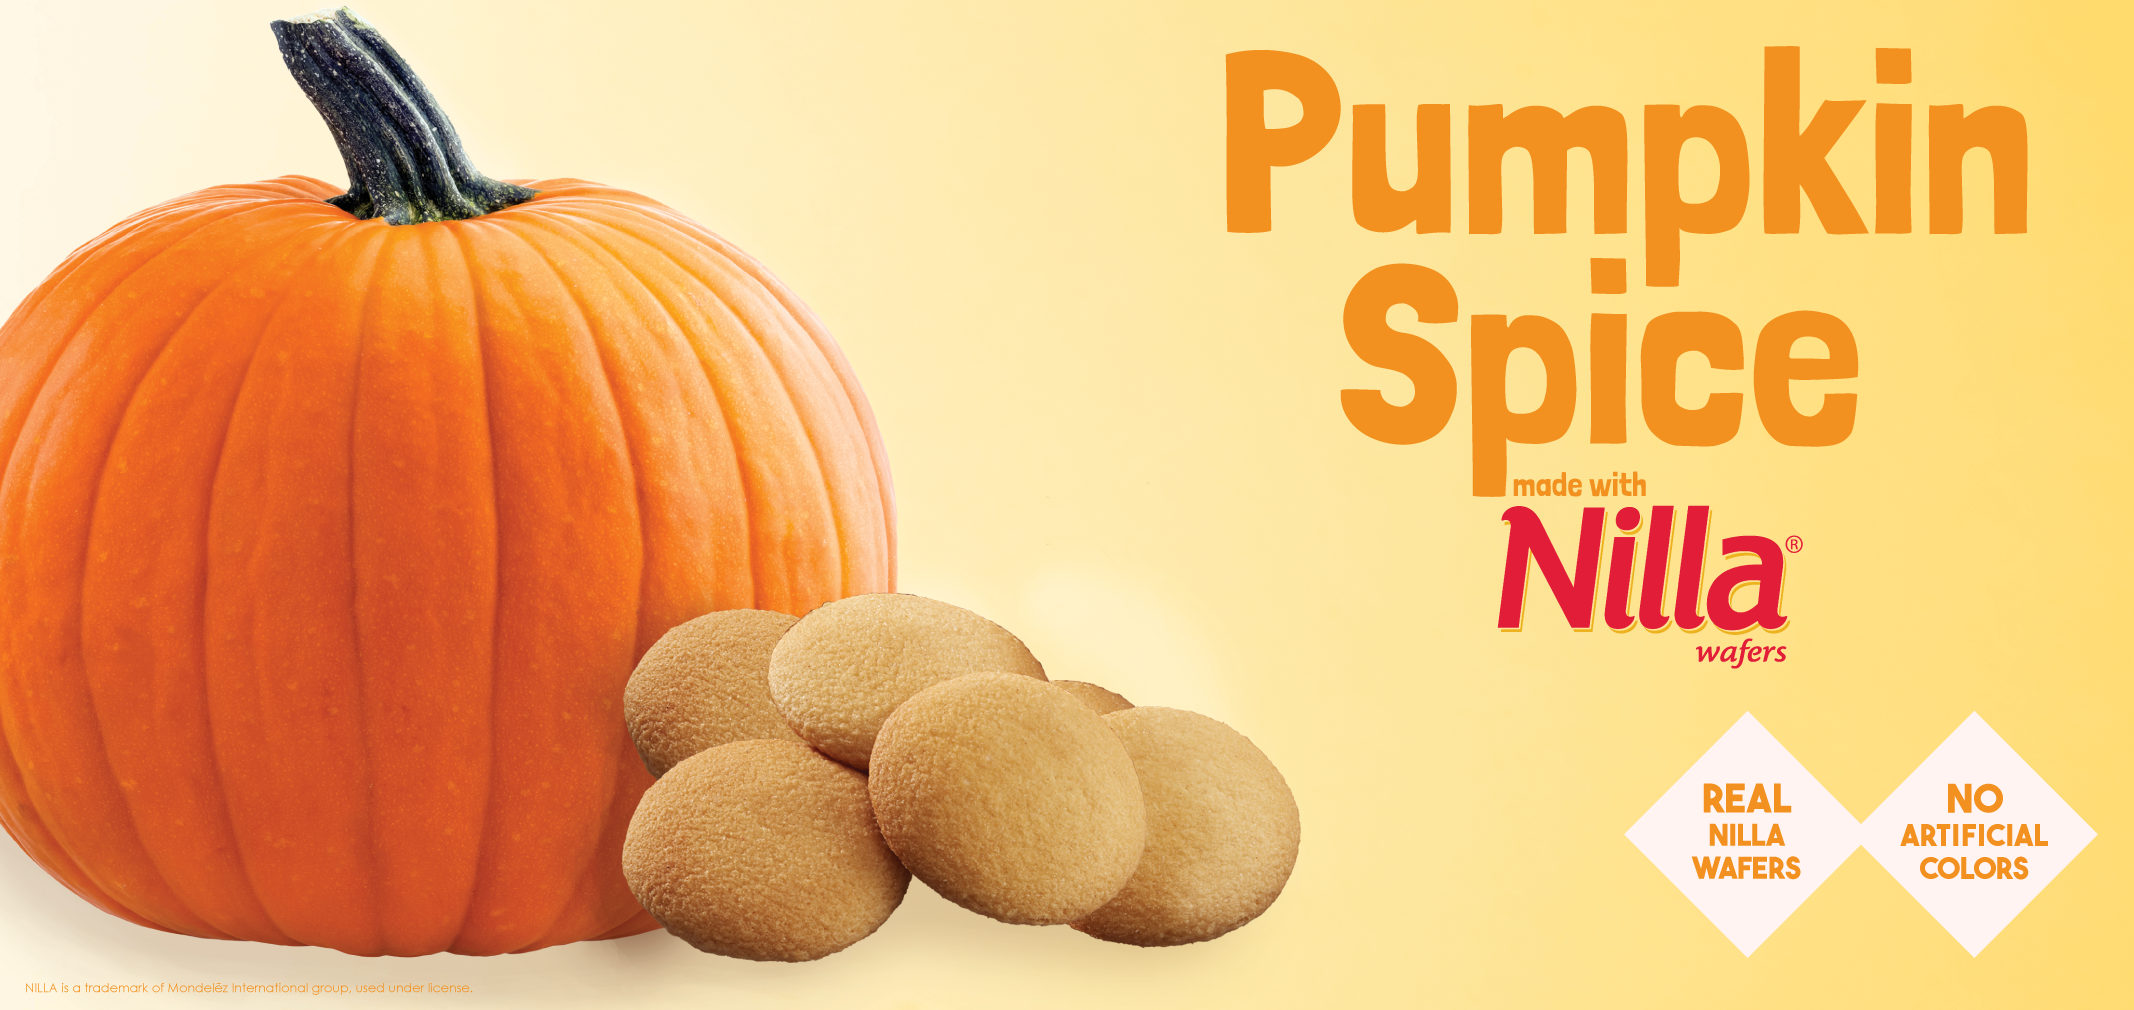 Pumpkin Spice made with Nilla Wafers label image